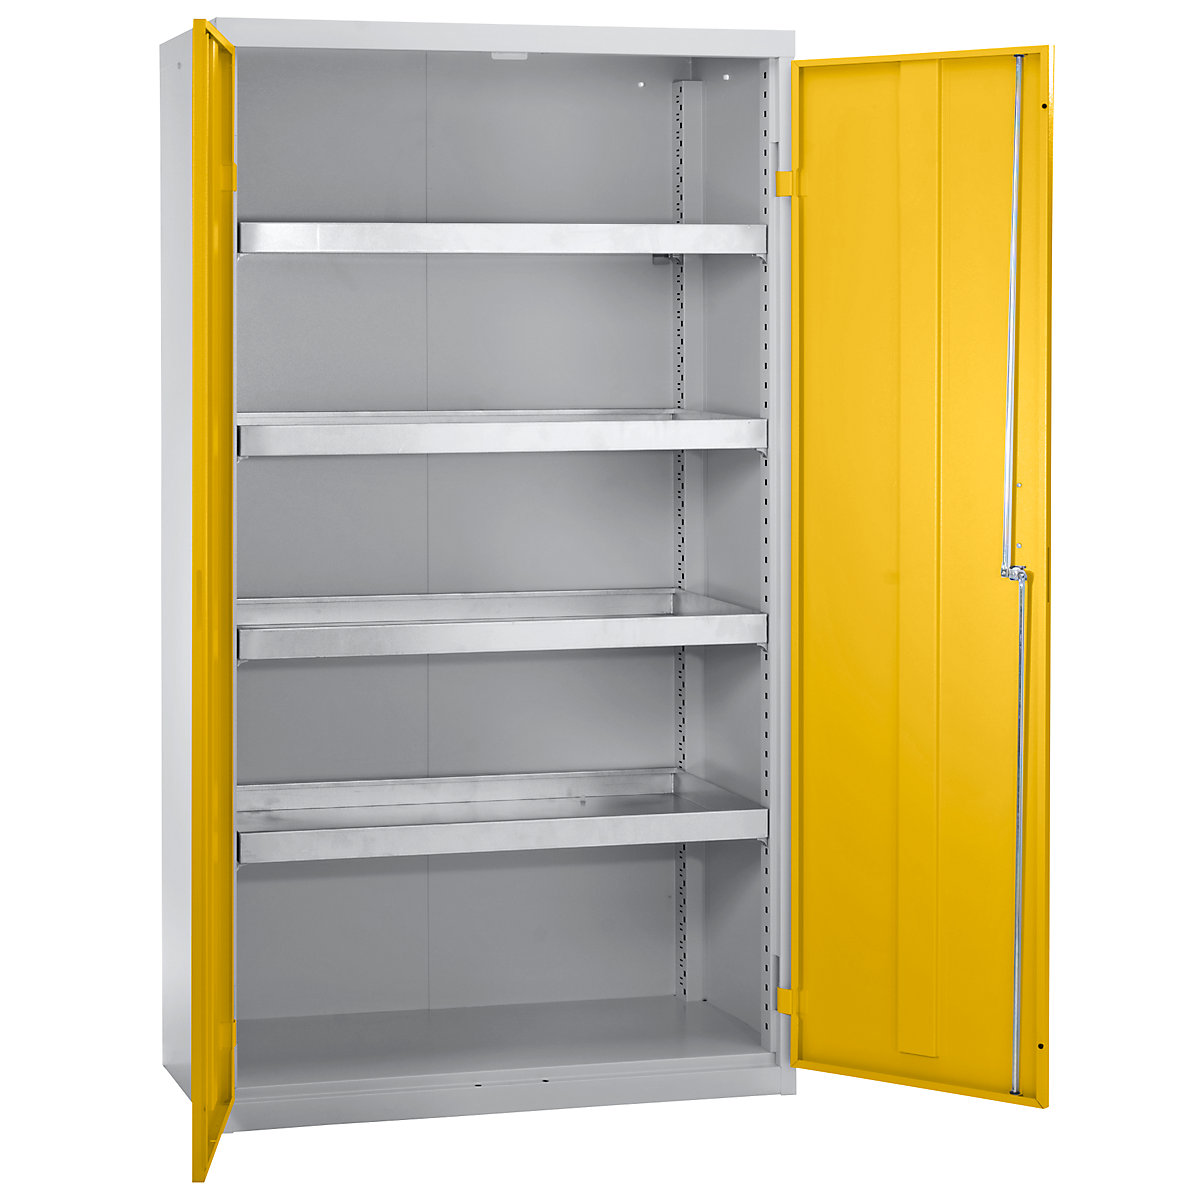 Environmental cupboard without door perforations, HxWxD 1800 x 1000 x 500 mm, 4 tray shelves, light grey / signal yellow-3